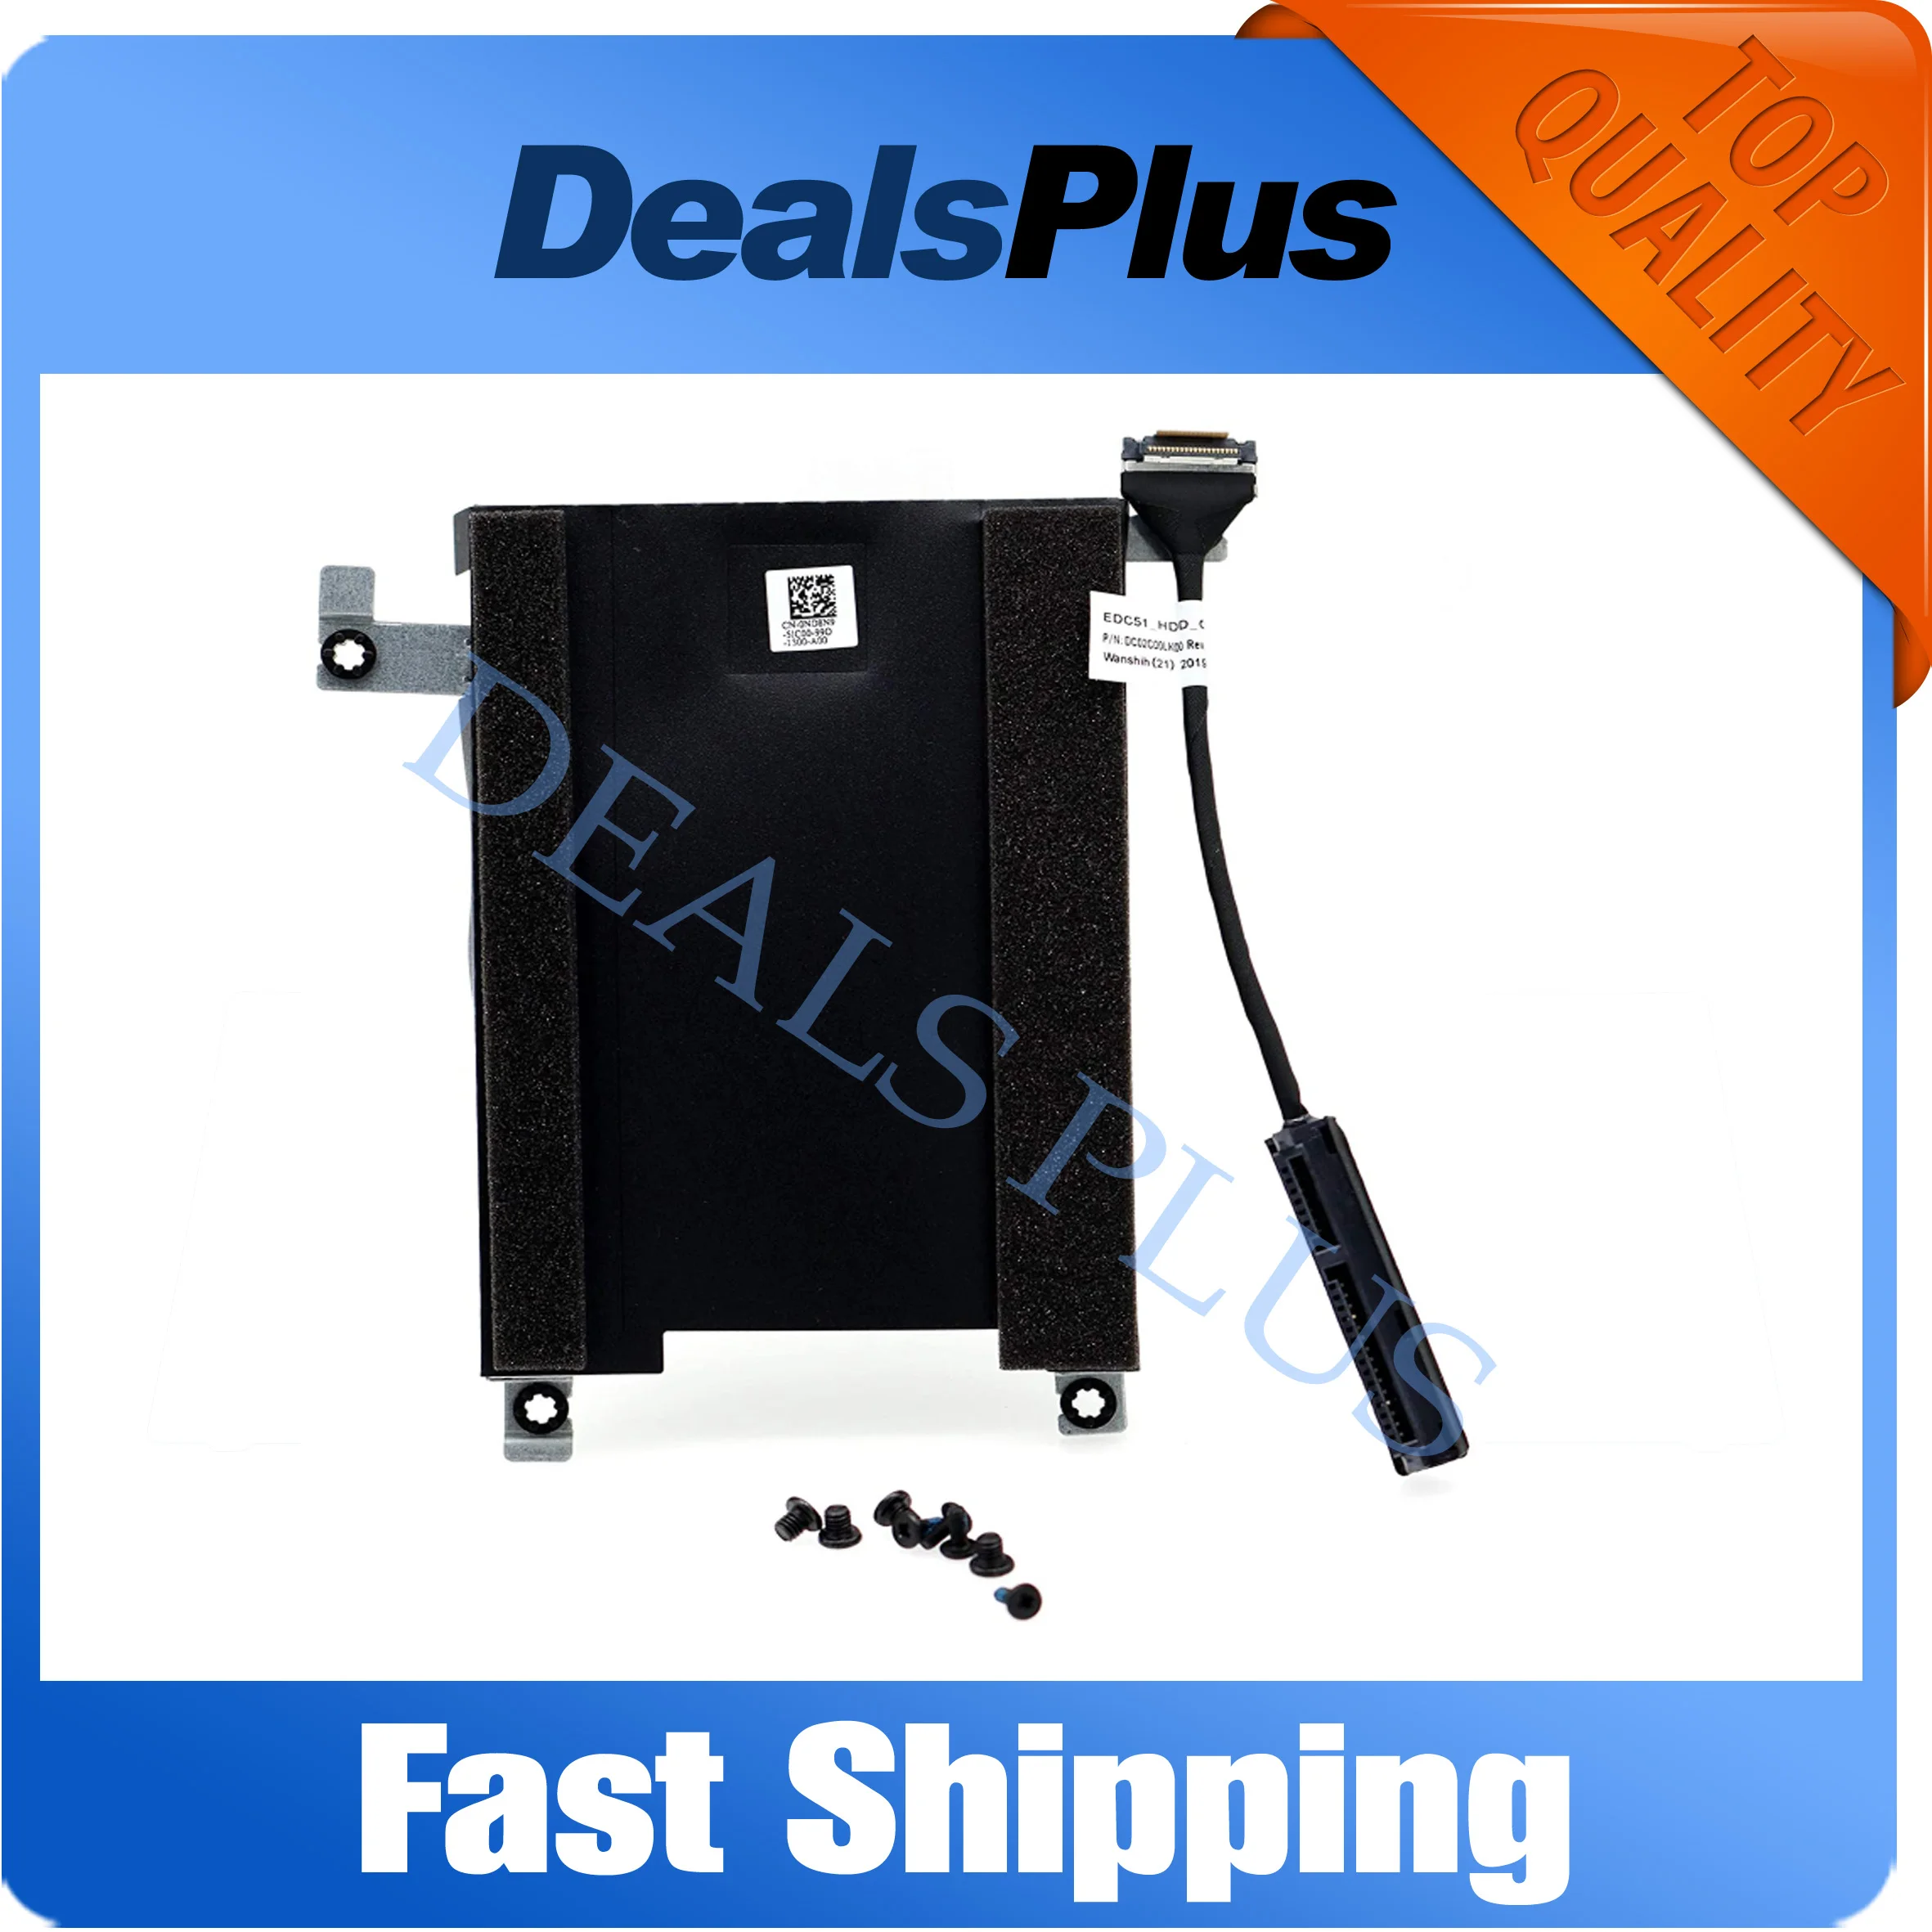 

New SSD SATA Hard Drive Cable 0XY5F7 XY5F7 + 2.5" HDD Caddy Bracket 0ND8N9 ND8N9 For Dell Latitude 5500 5501 5502 5505 5510 5511